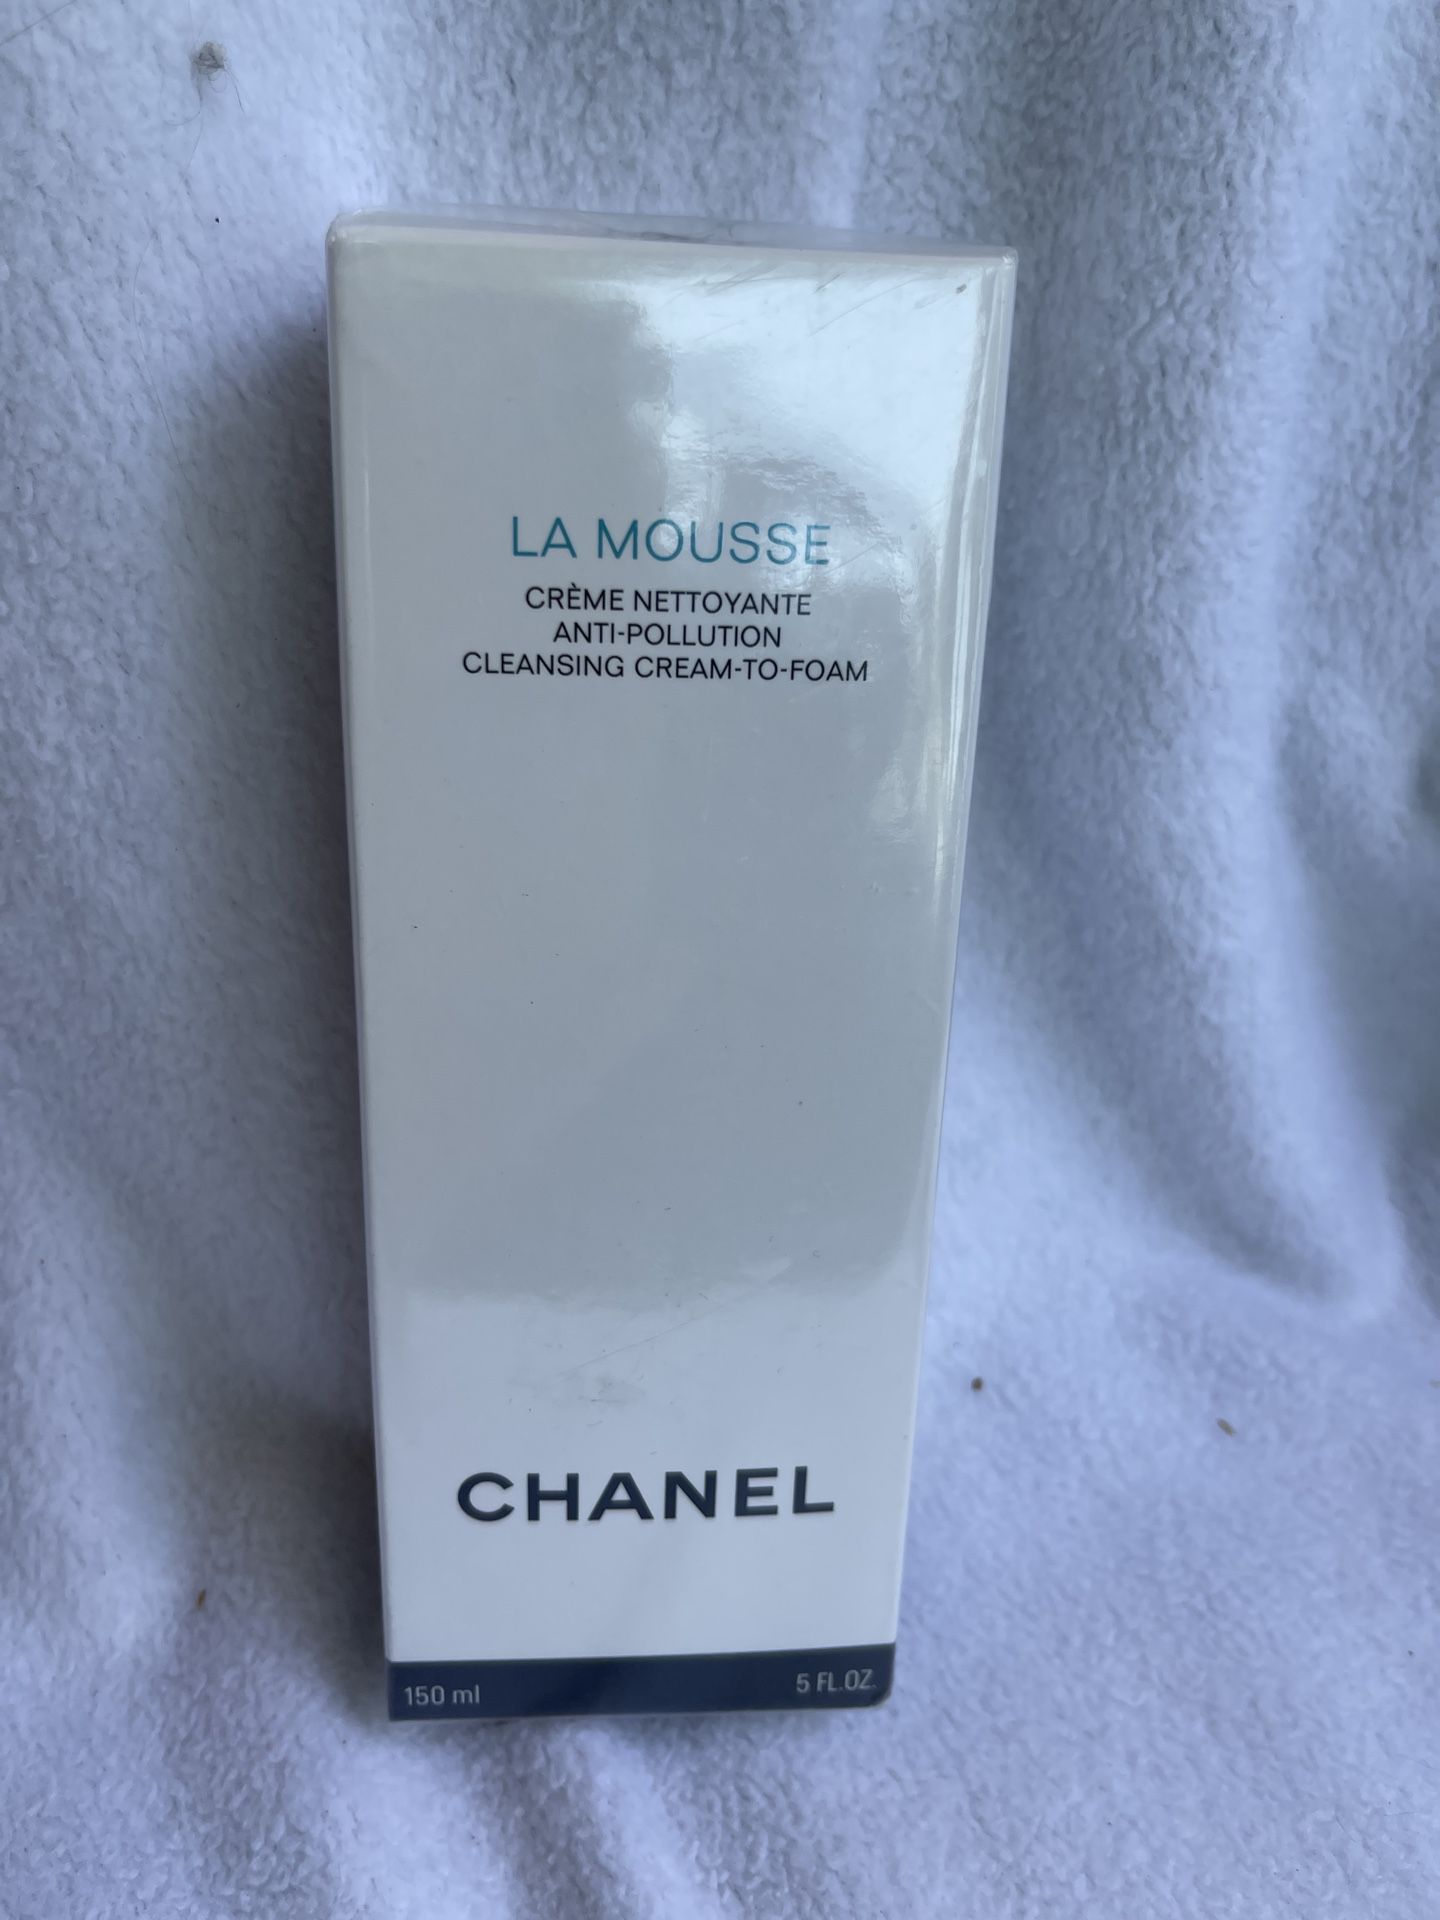 CHANEL LA Mousse Anti-Pollution Cleansing Cream-to-Foam 150ML for